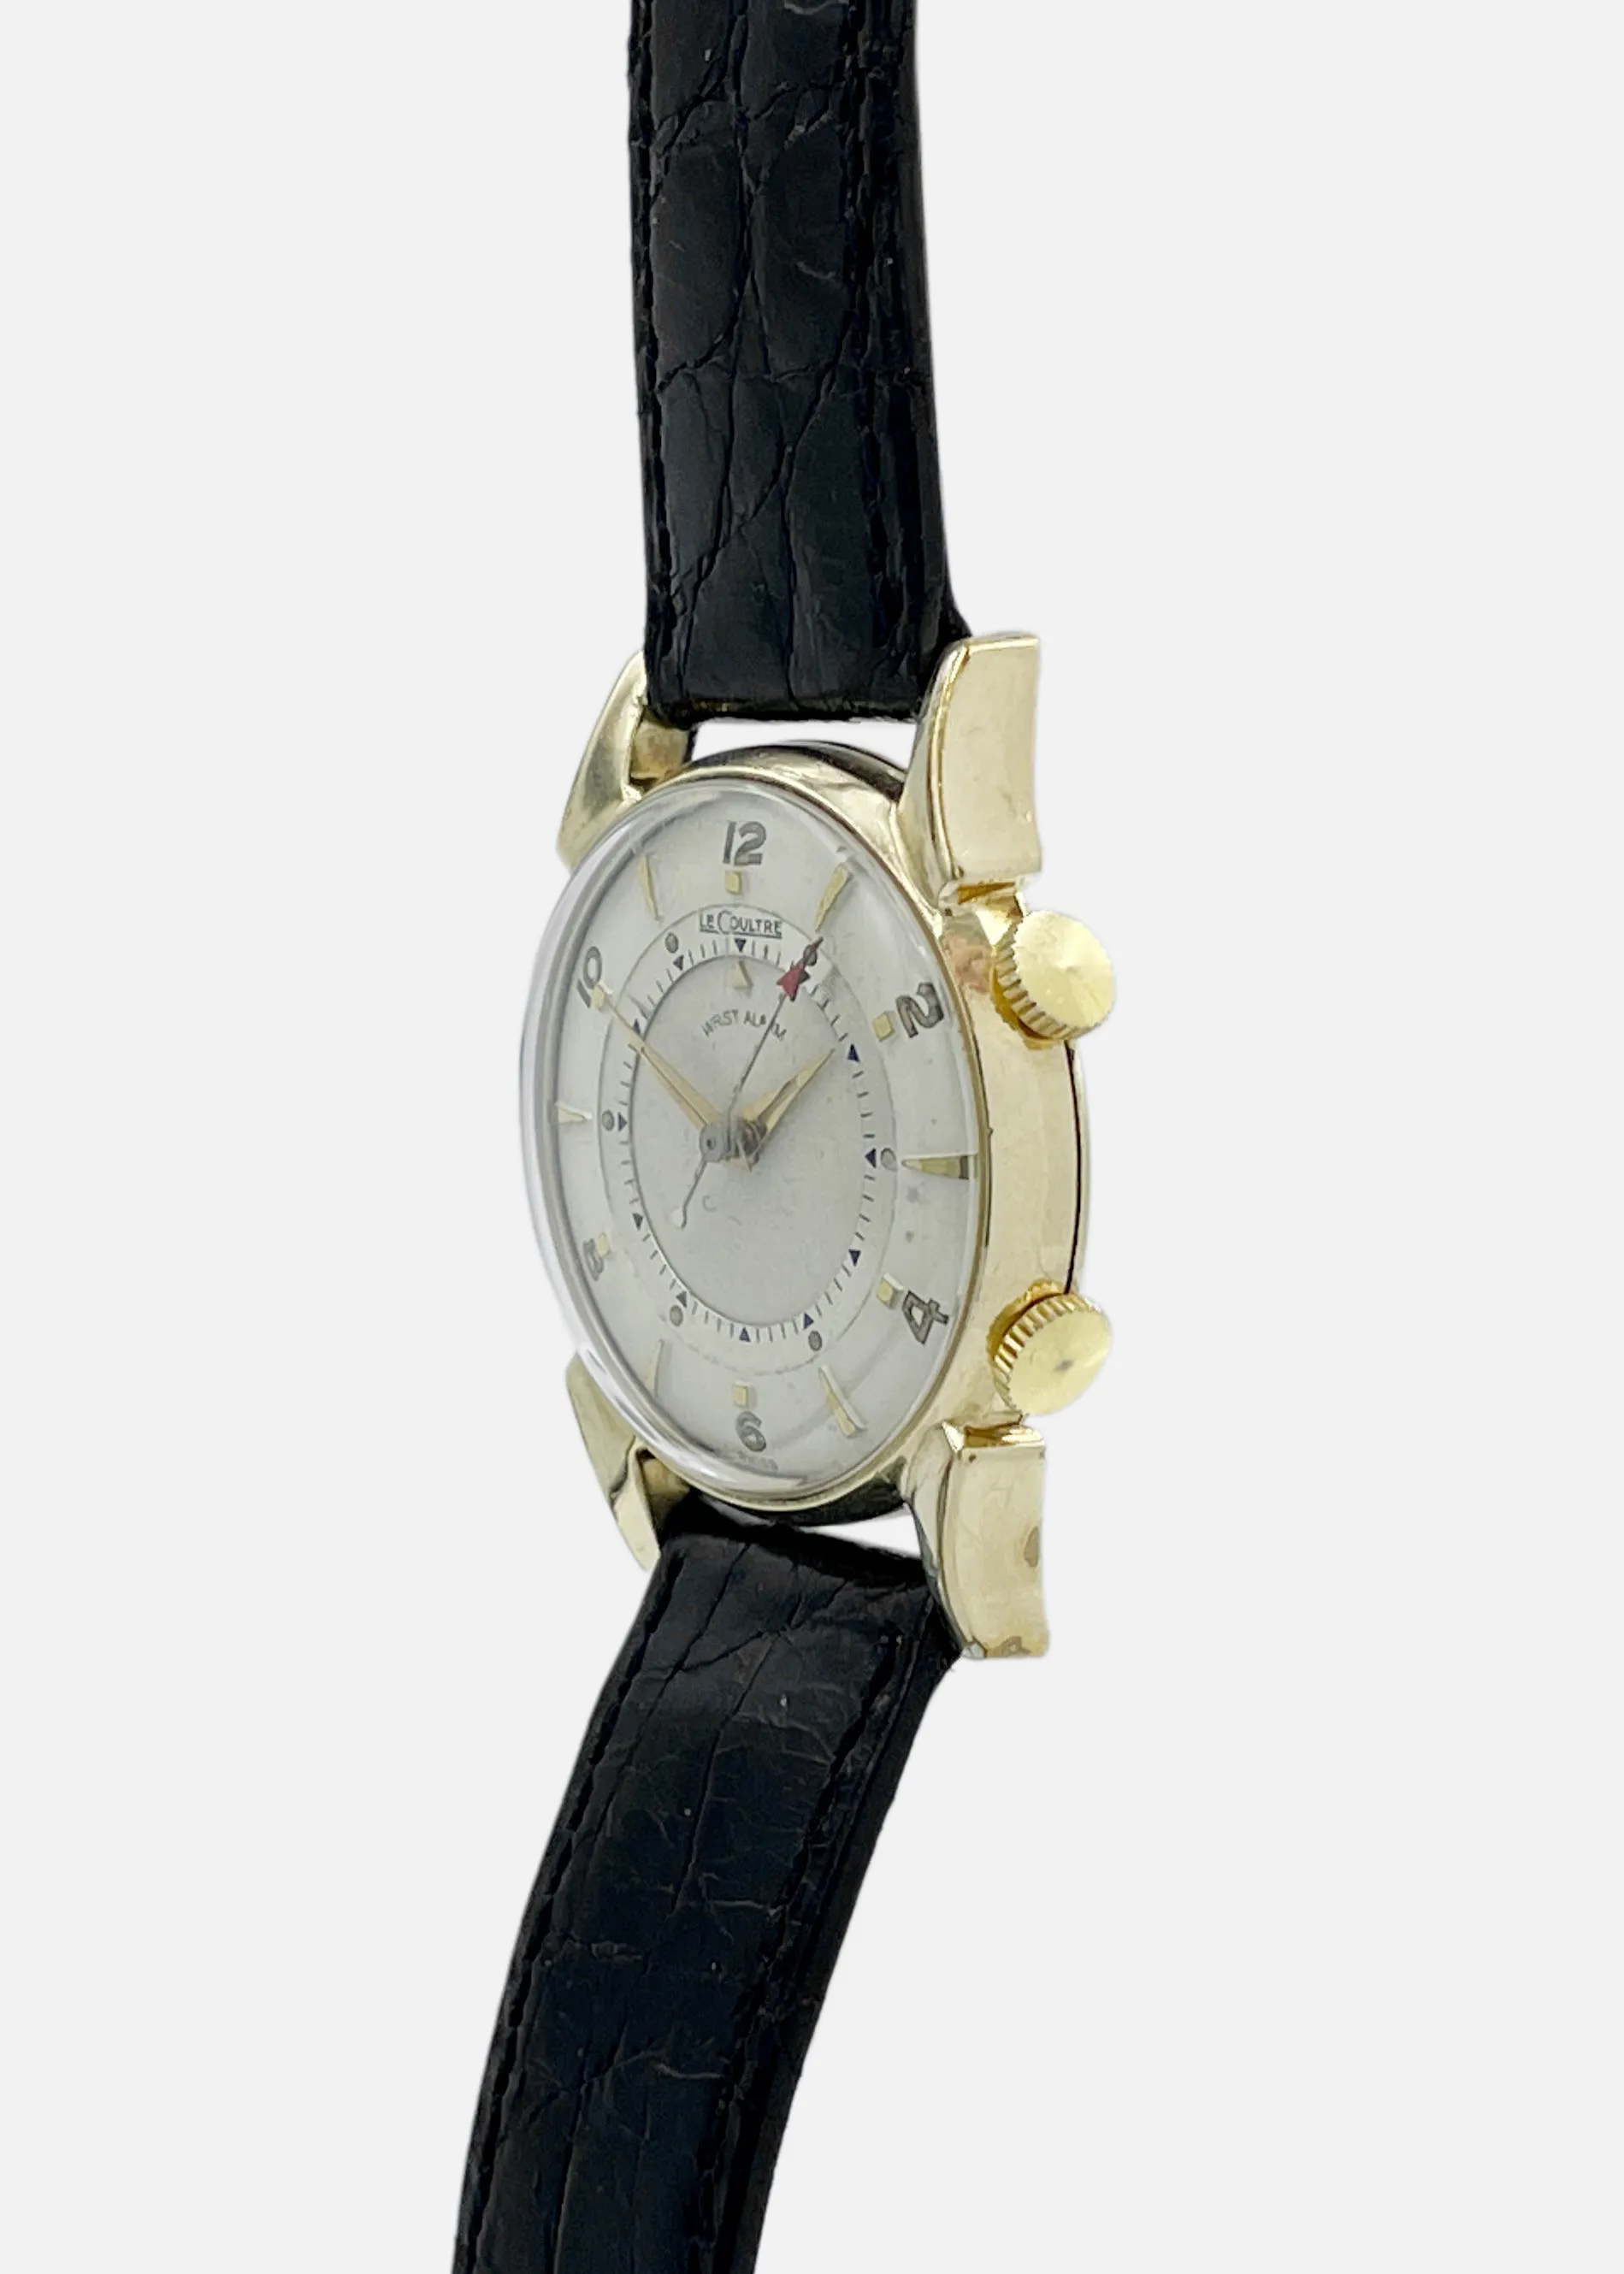 Jaeger-LeCoultre Memovox 814 33mm Gold-filled Silver 1